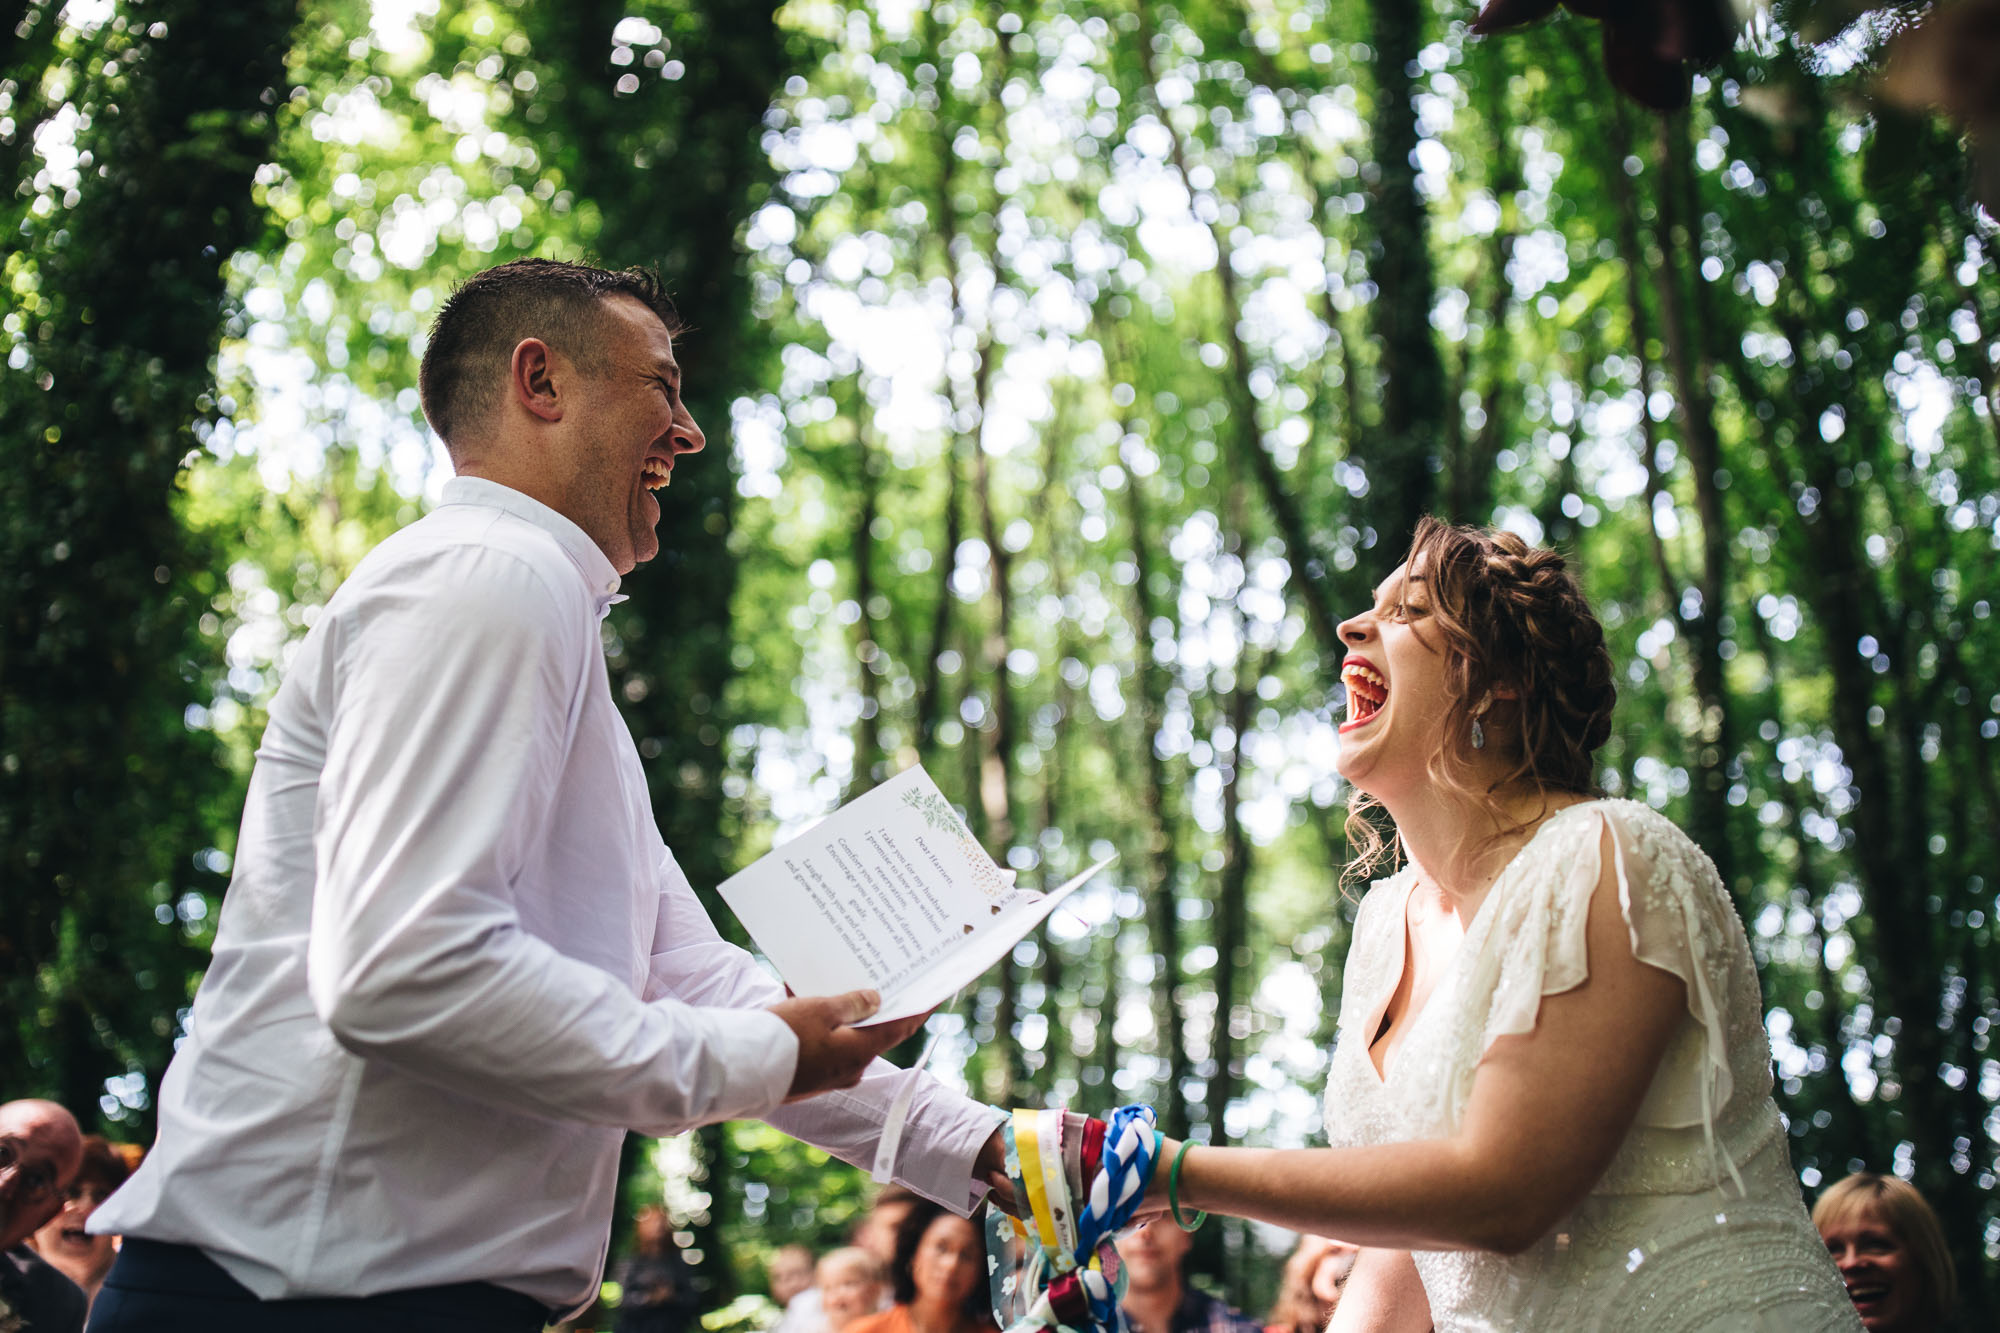 couple laugh at each other during the vows against the tree canopy backdrop